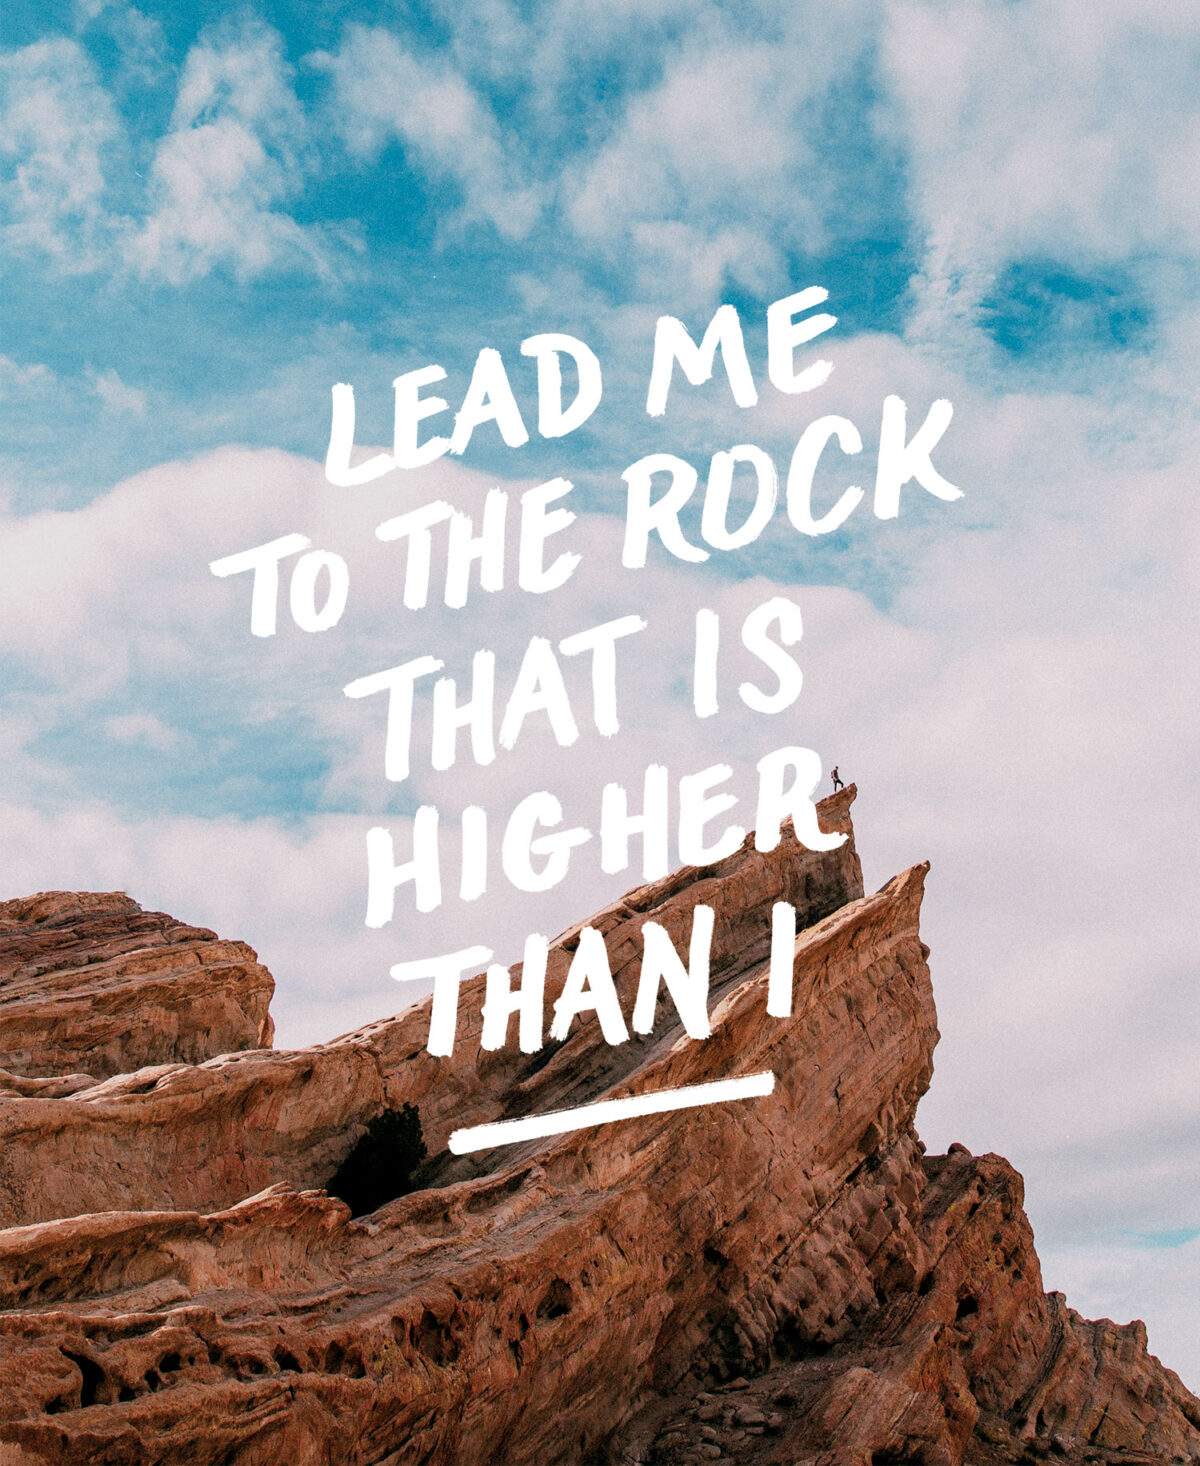 Psalm 61 hand lettering that reads: Lead me to the rock that is higher than I